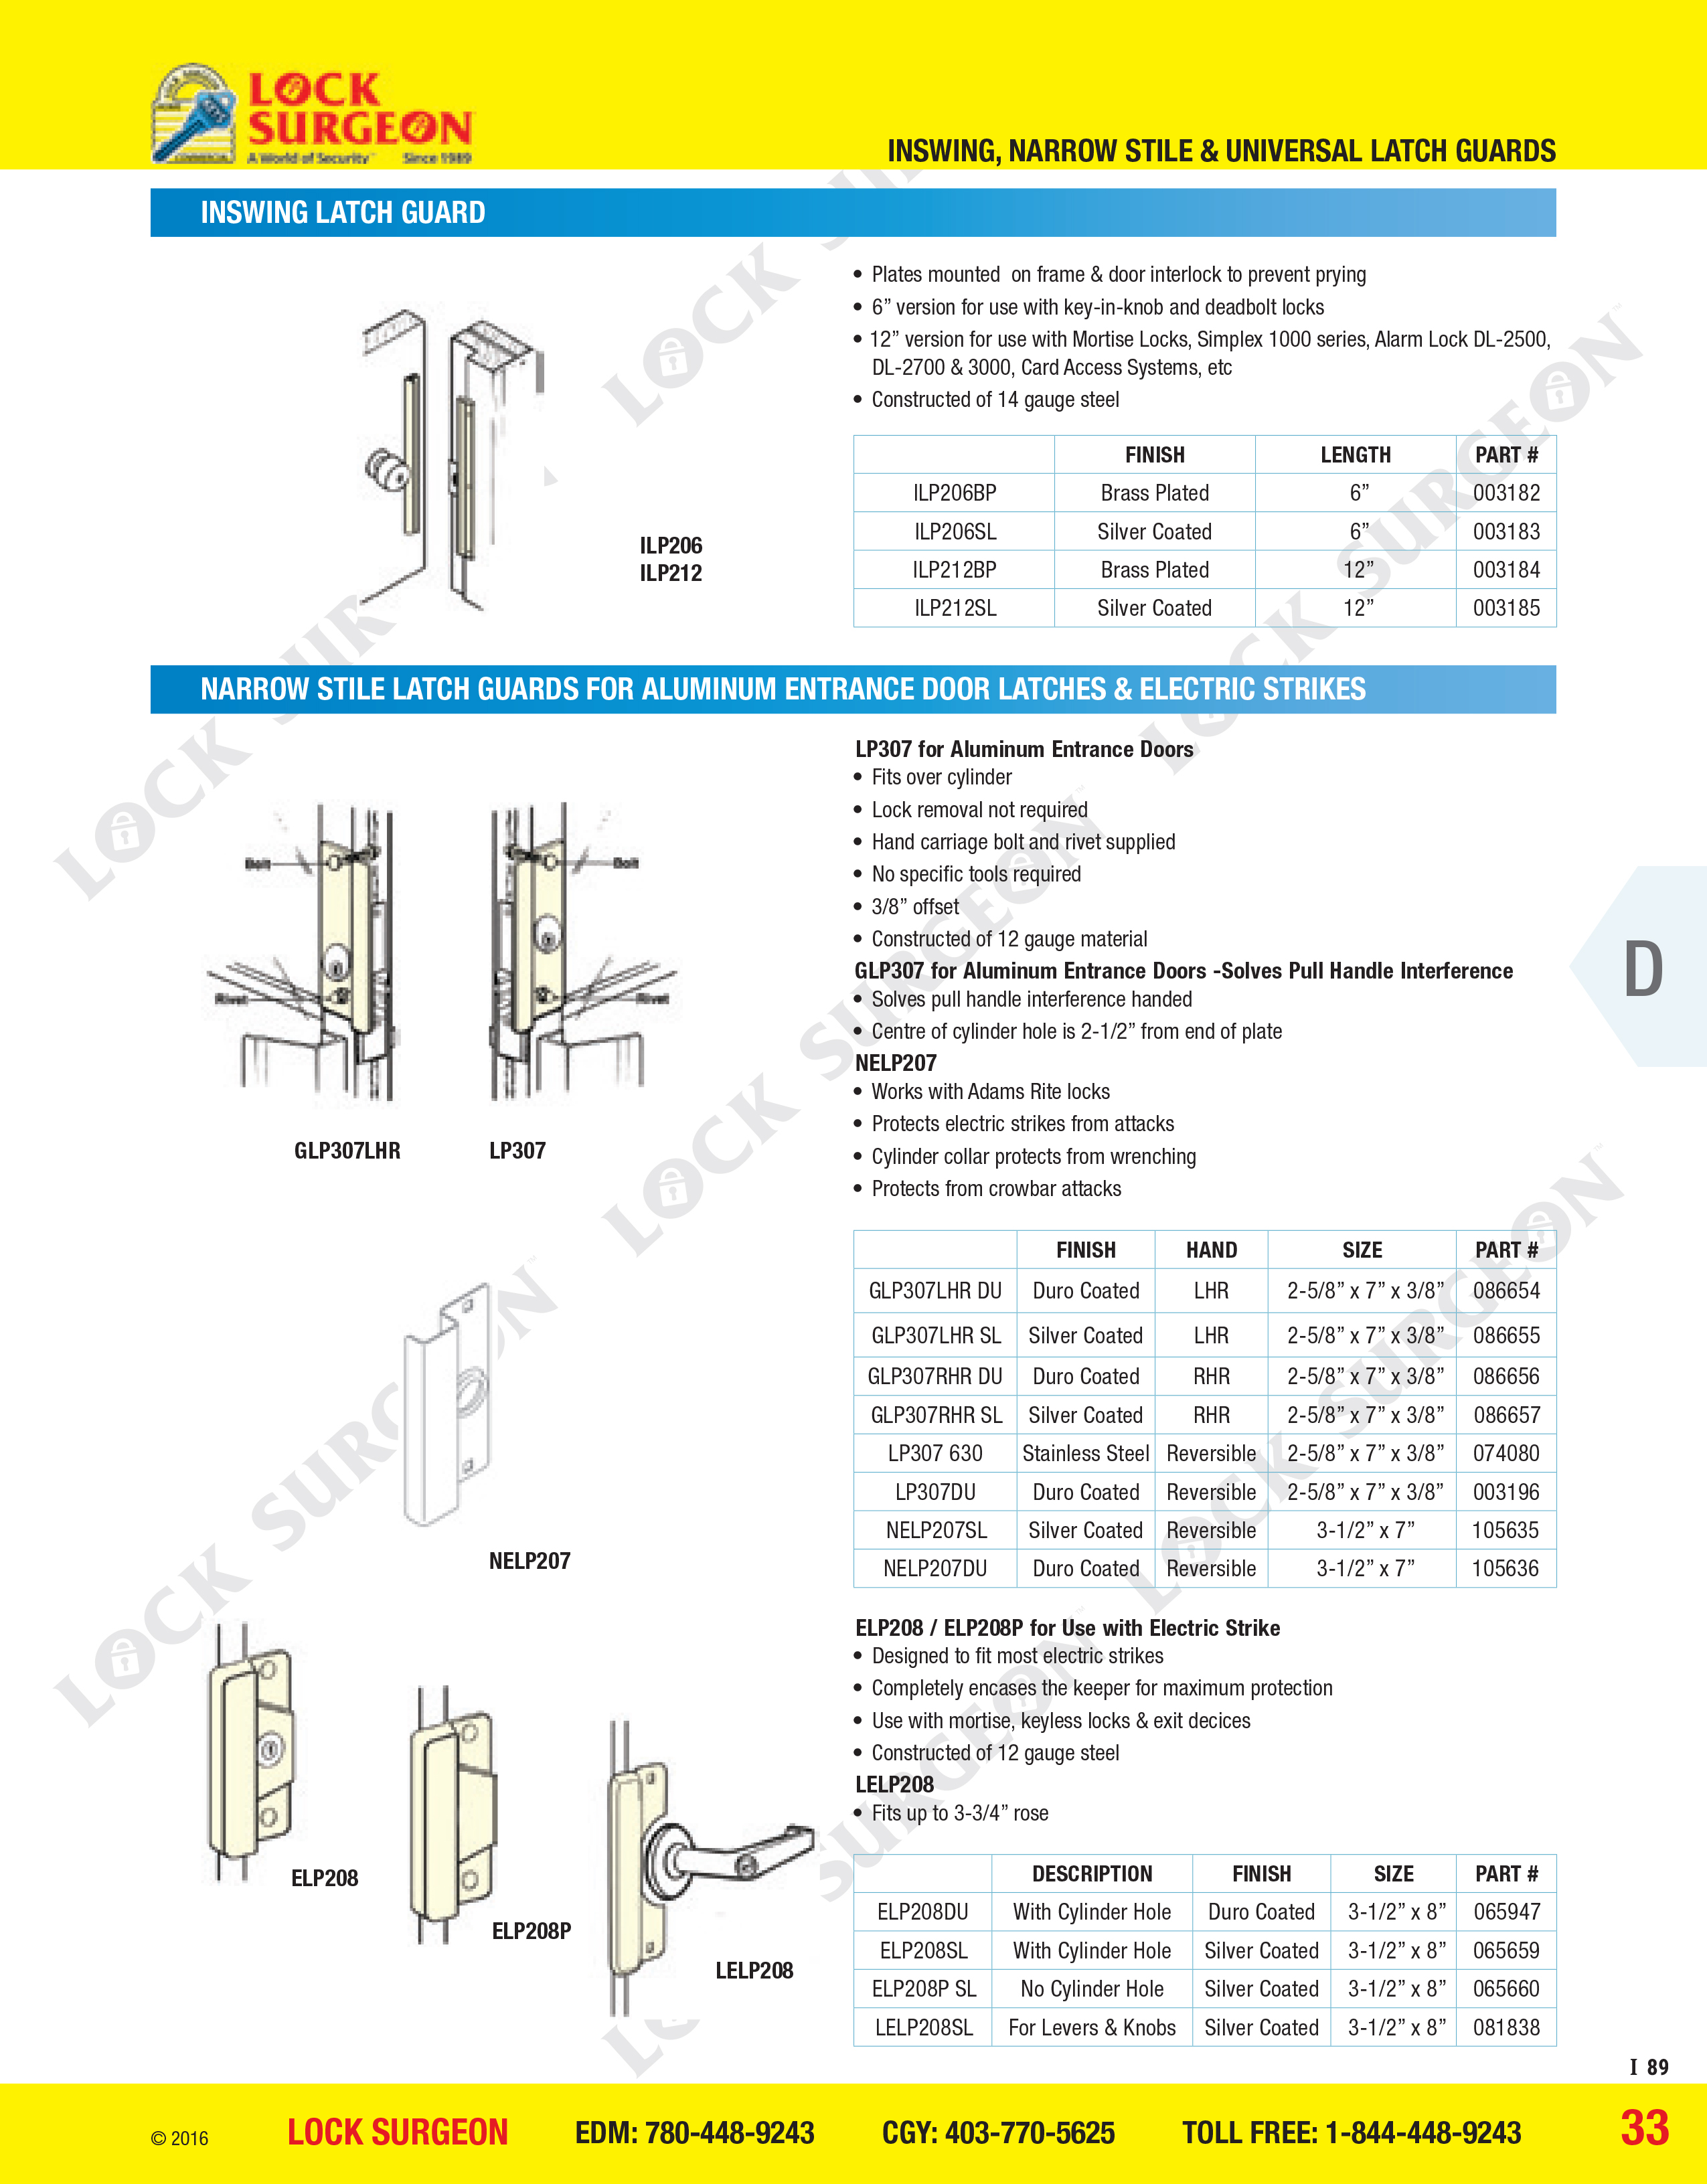 Inswing latch guard narrow stile for aluminium entrance door latch & electric strikes in Acheson.